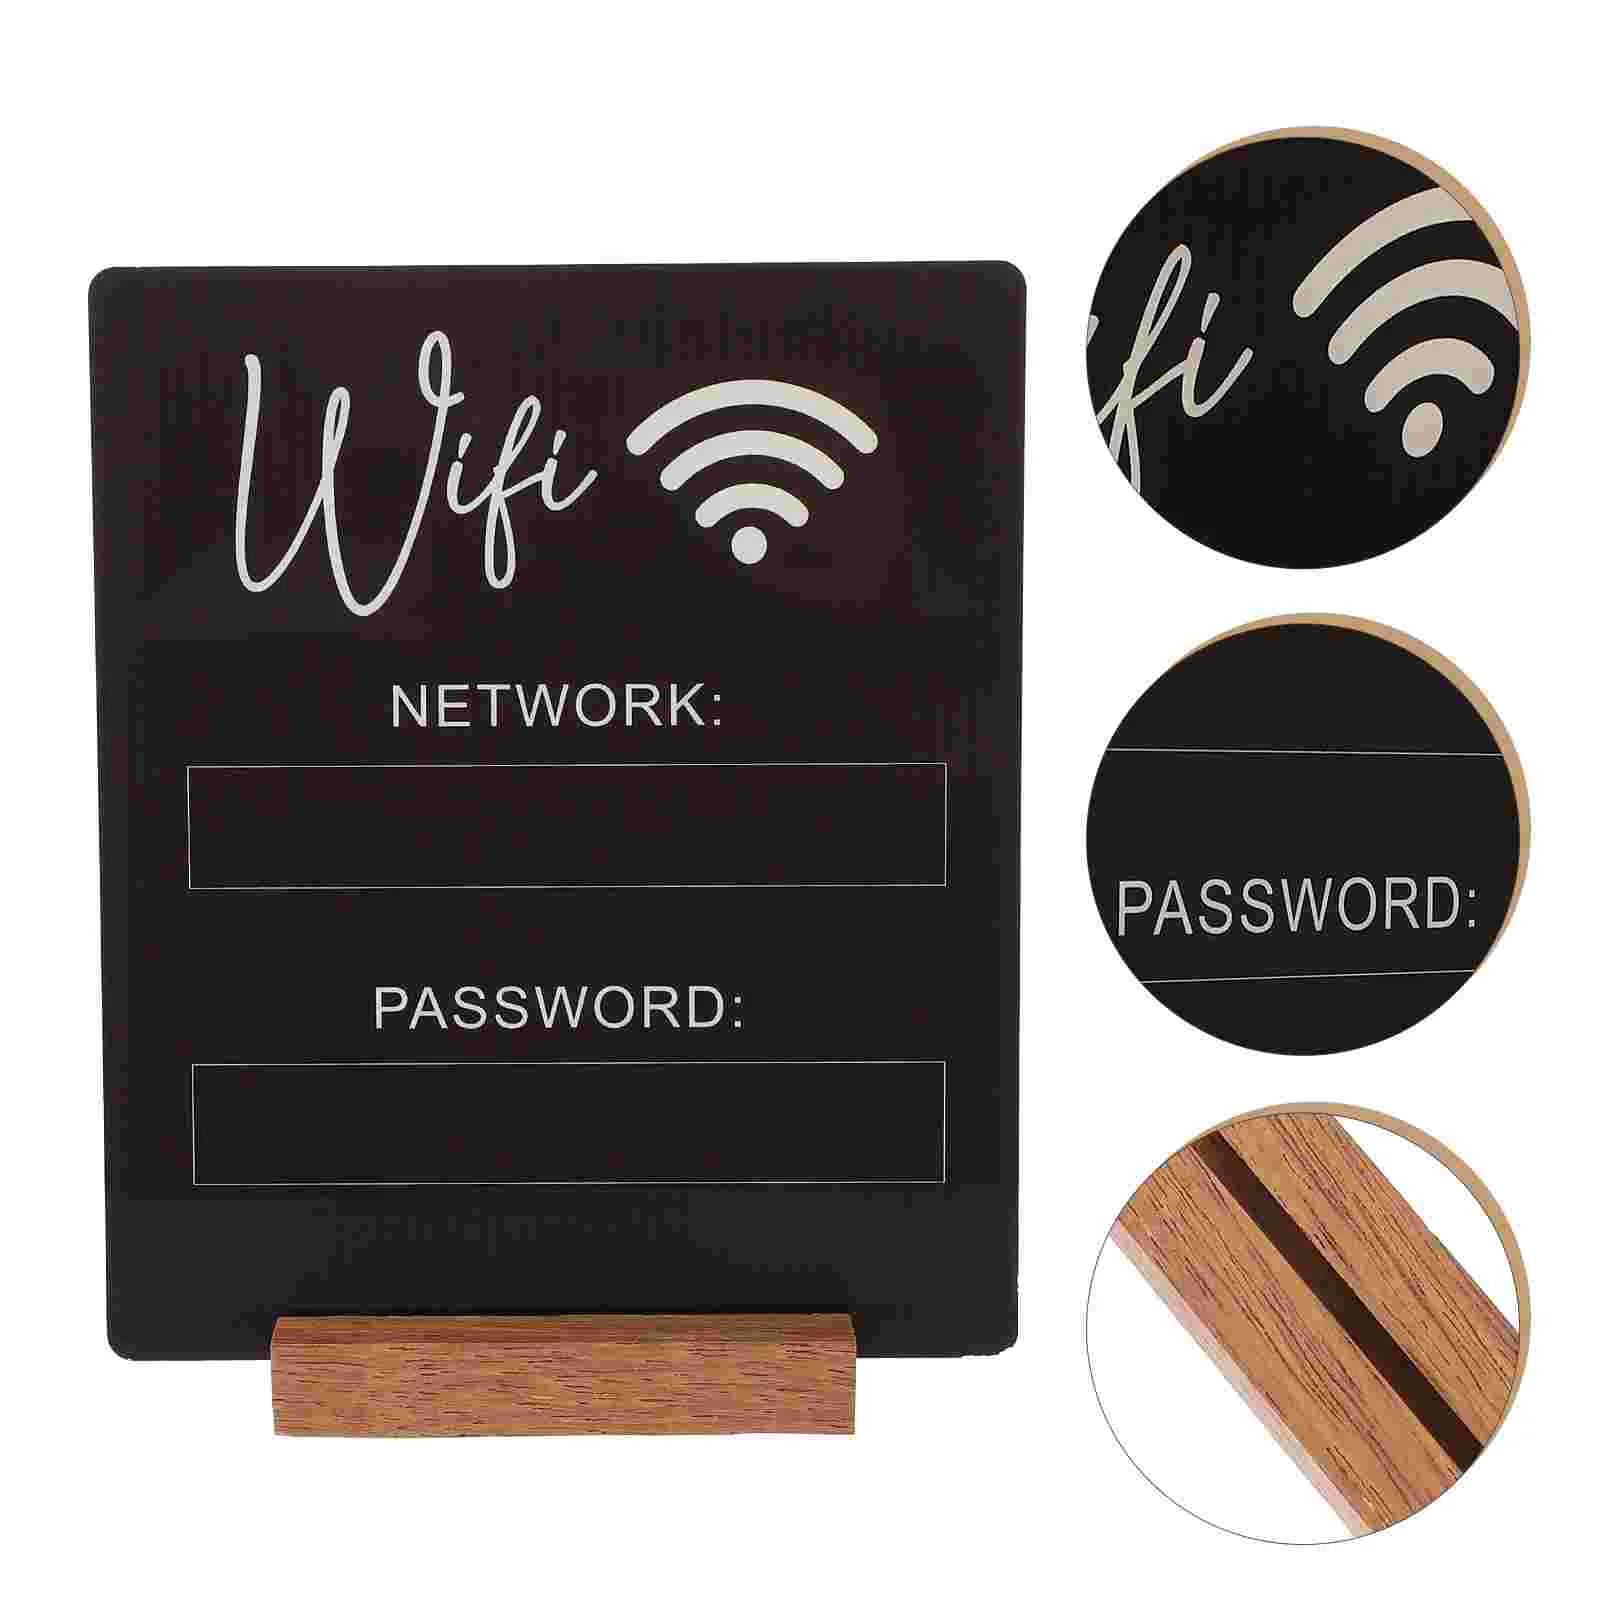 

Decor Wifi Password Sign for Home Table Account and Signage Hotel Reminder Guest Room